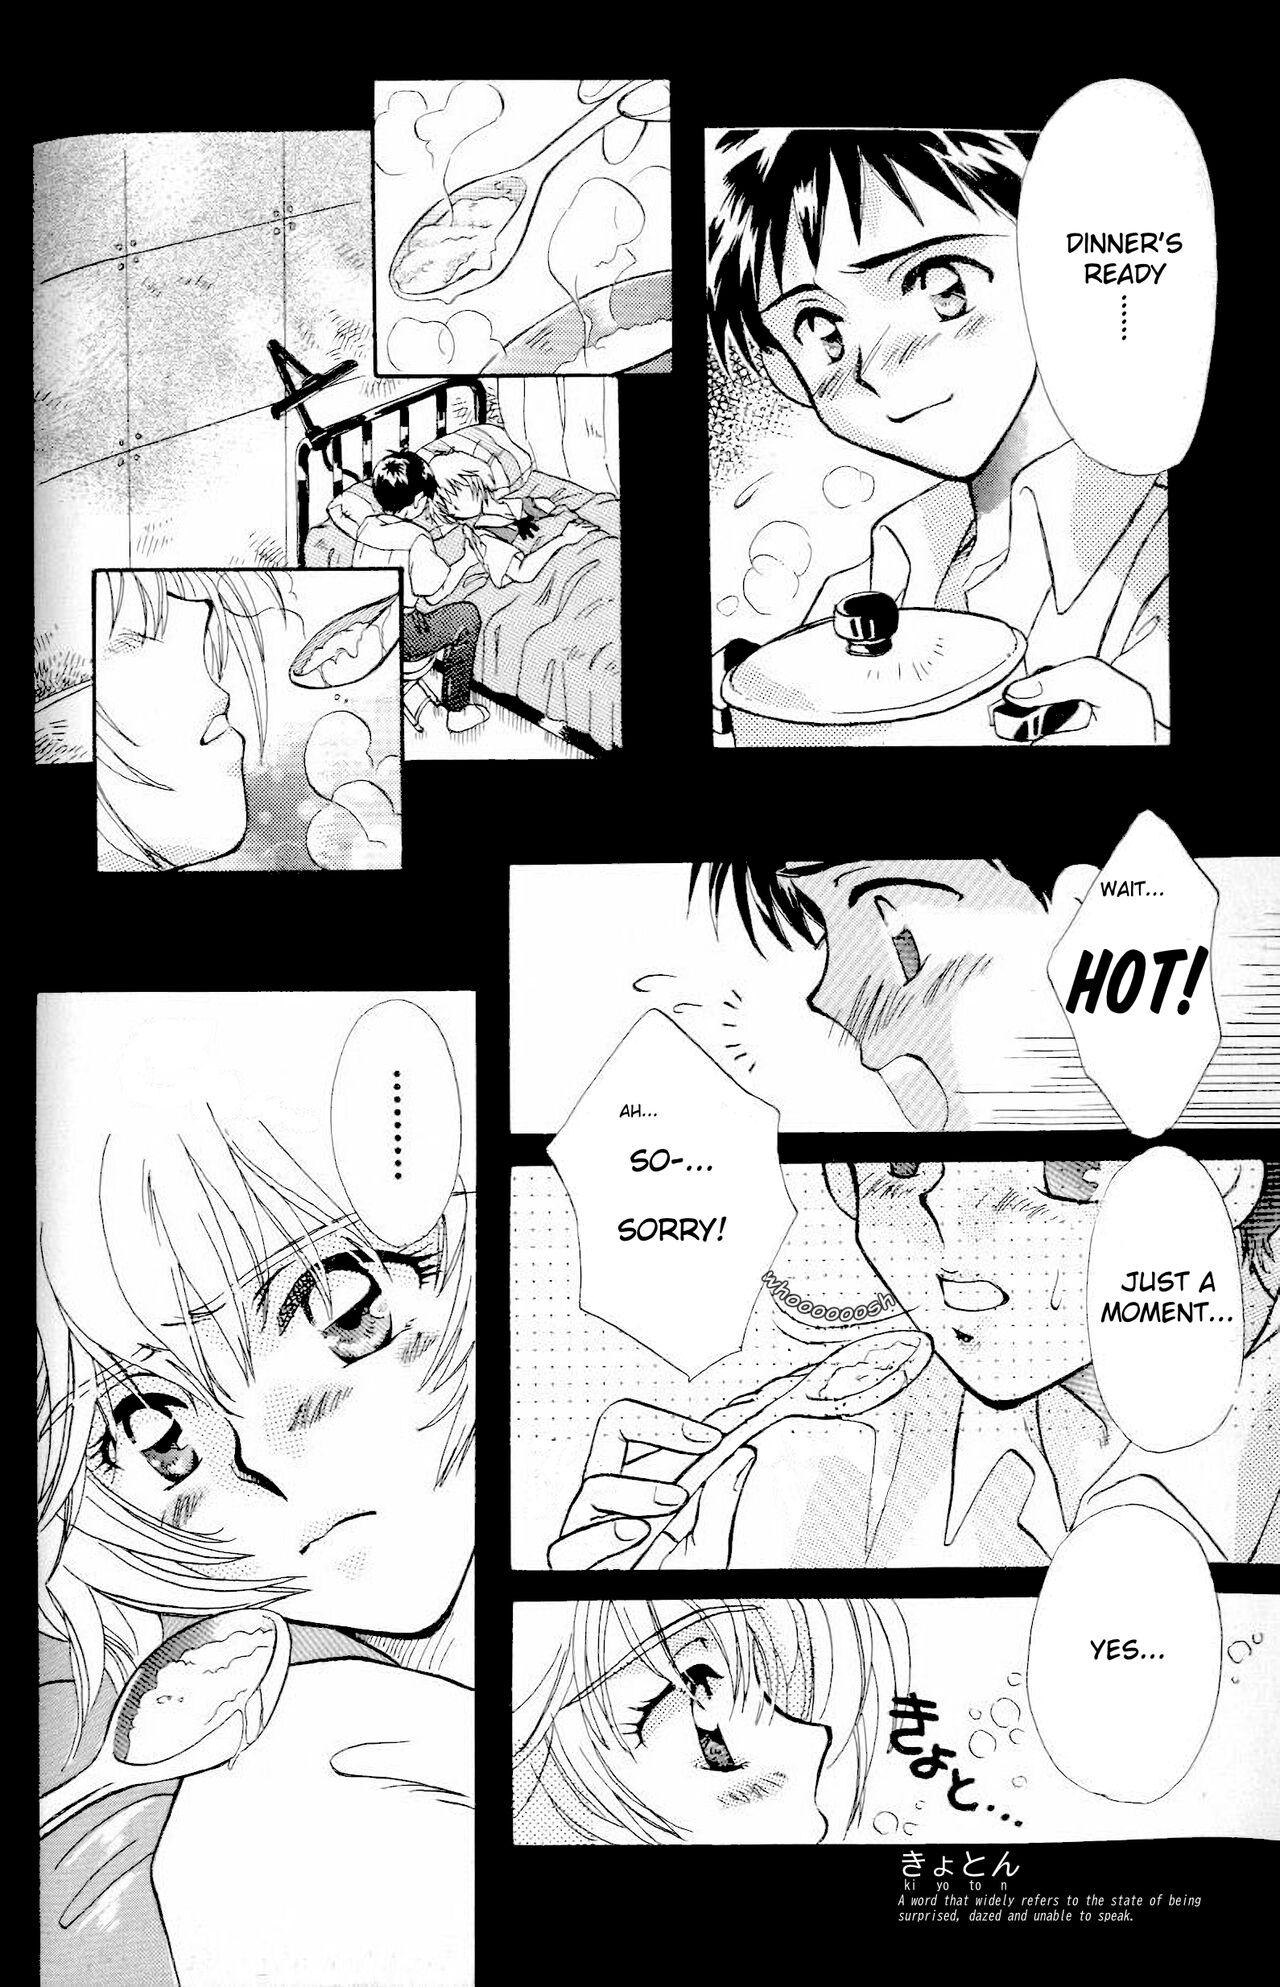 Sexteen How To Fly In The Sky - Please Be True Episode 0:1 - Neon genesis evangelion Dykes - Page 8